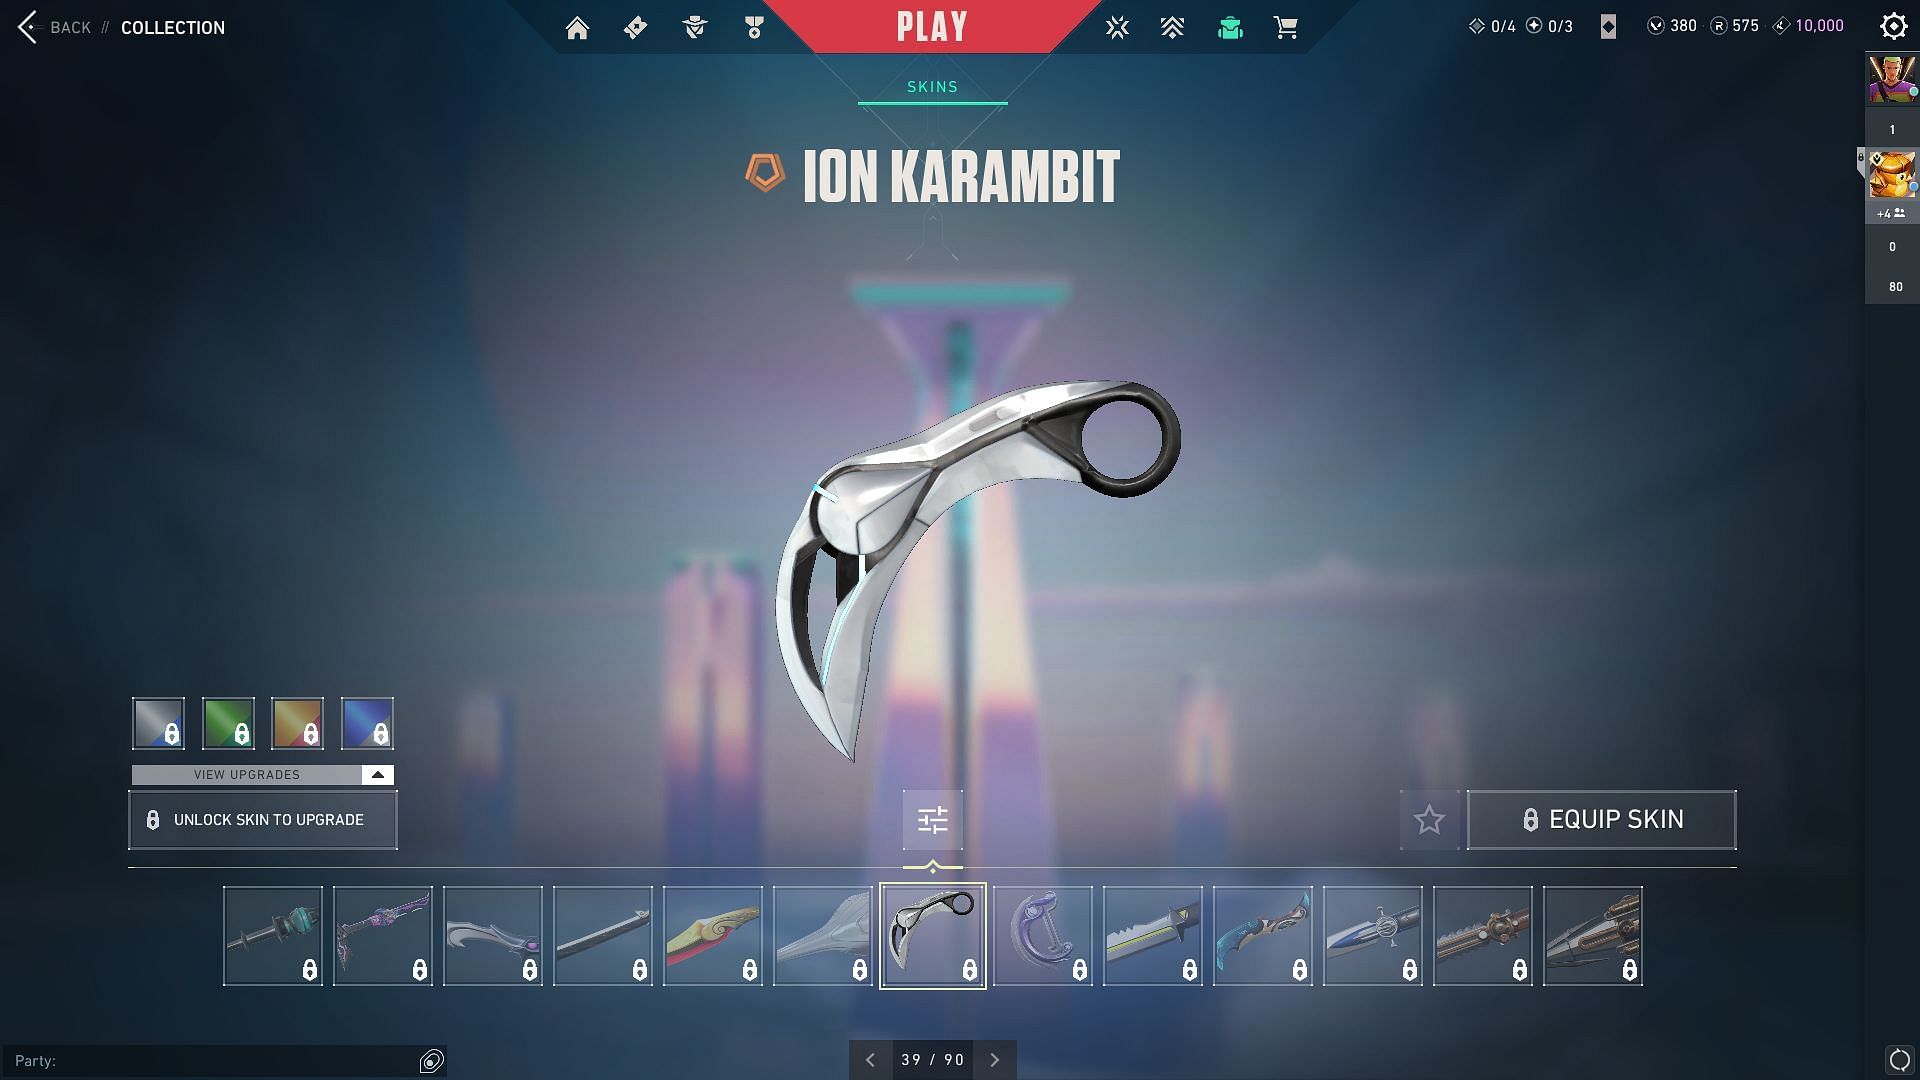 Ion Karambit(image by Riot Games)